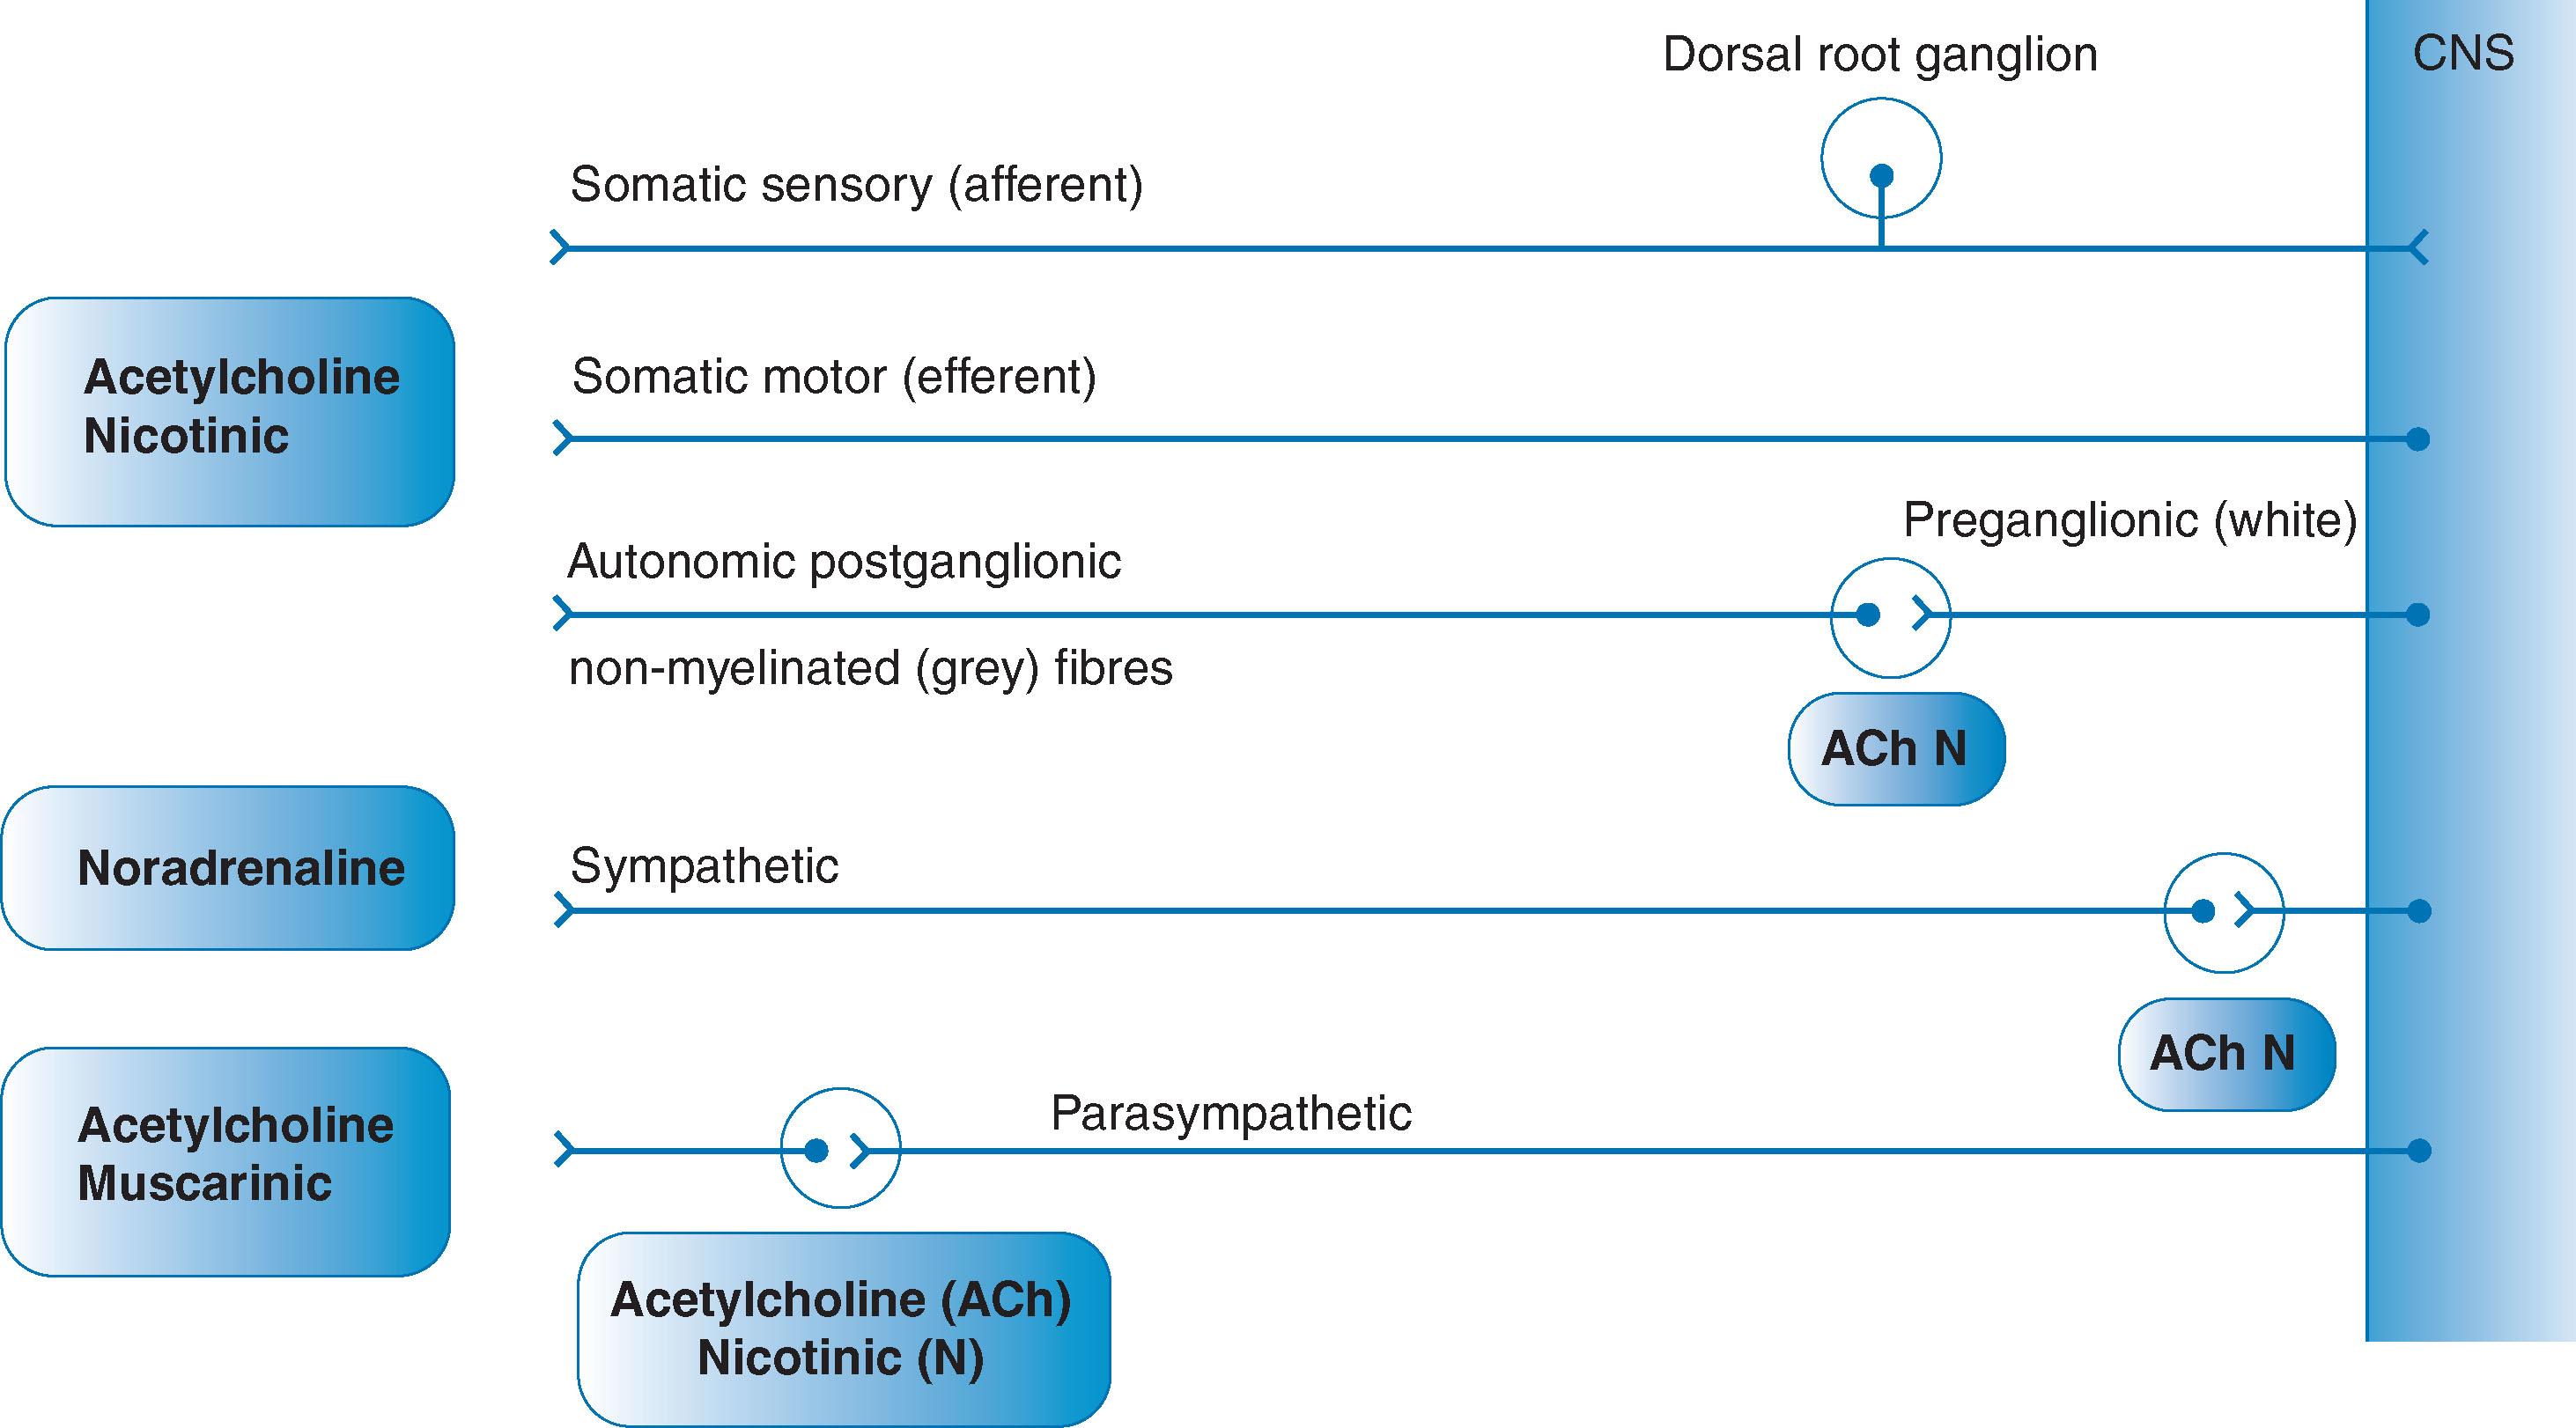 Fig. 5.2, Diagrammatic representation of the neurone arrangements and neurotransmitters of the somatic and autonomic nervous systems. CNS , Central nervous system.